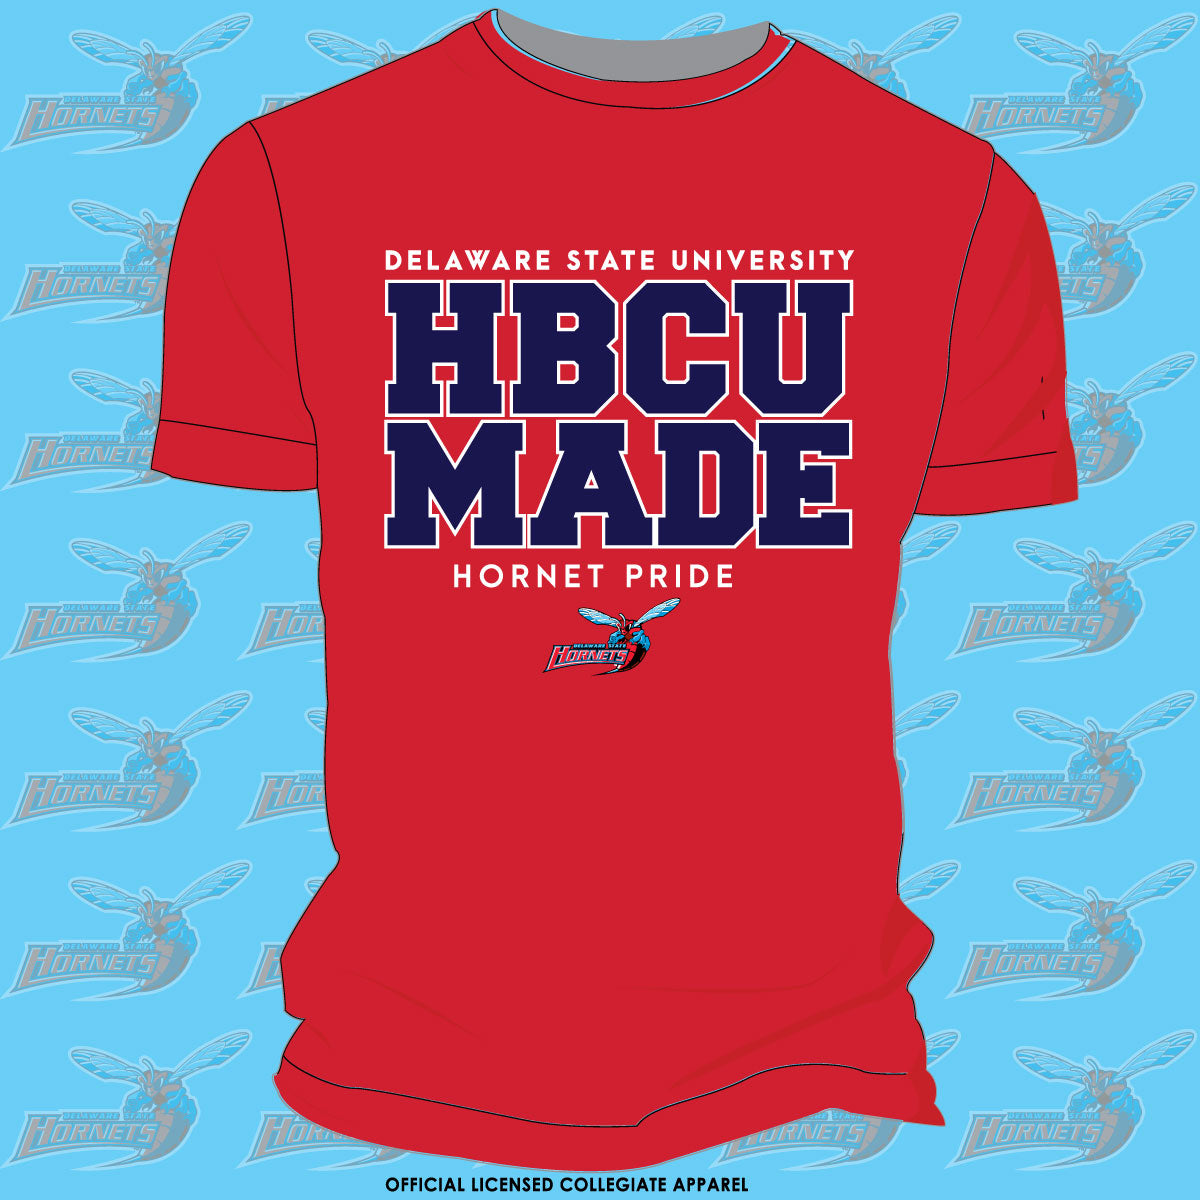 Del State | HBCU MADE Red Unisex Tees (Z)